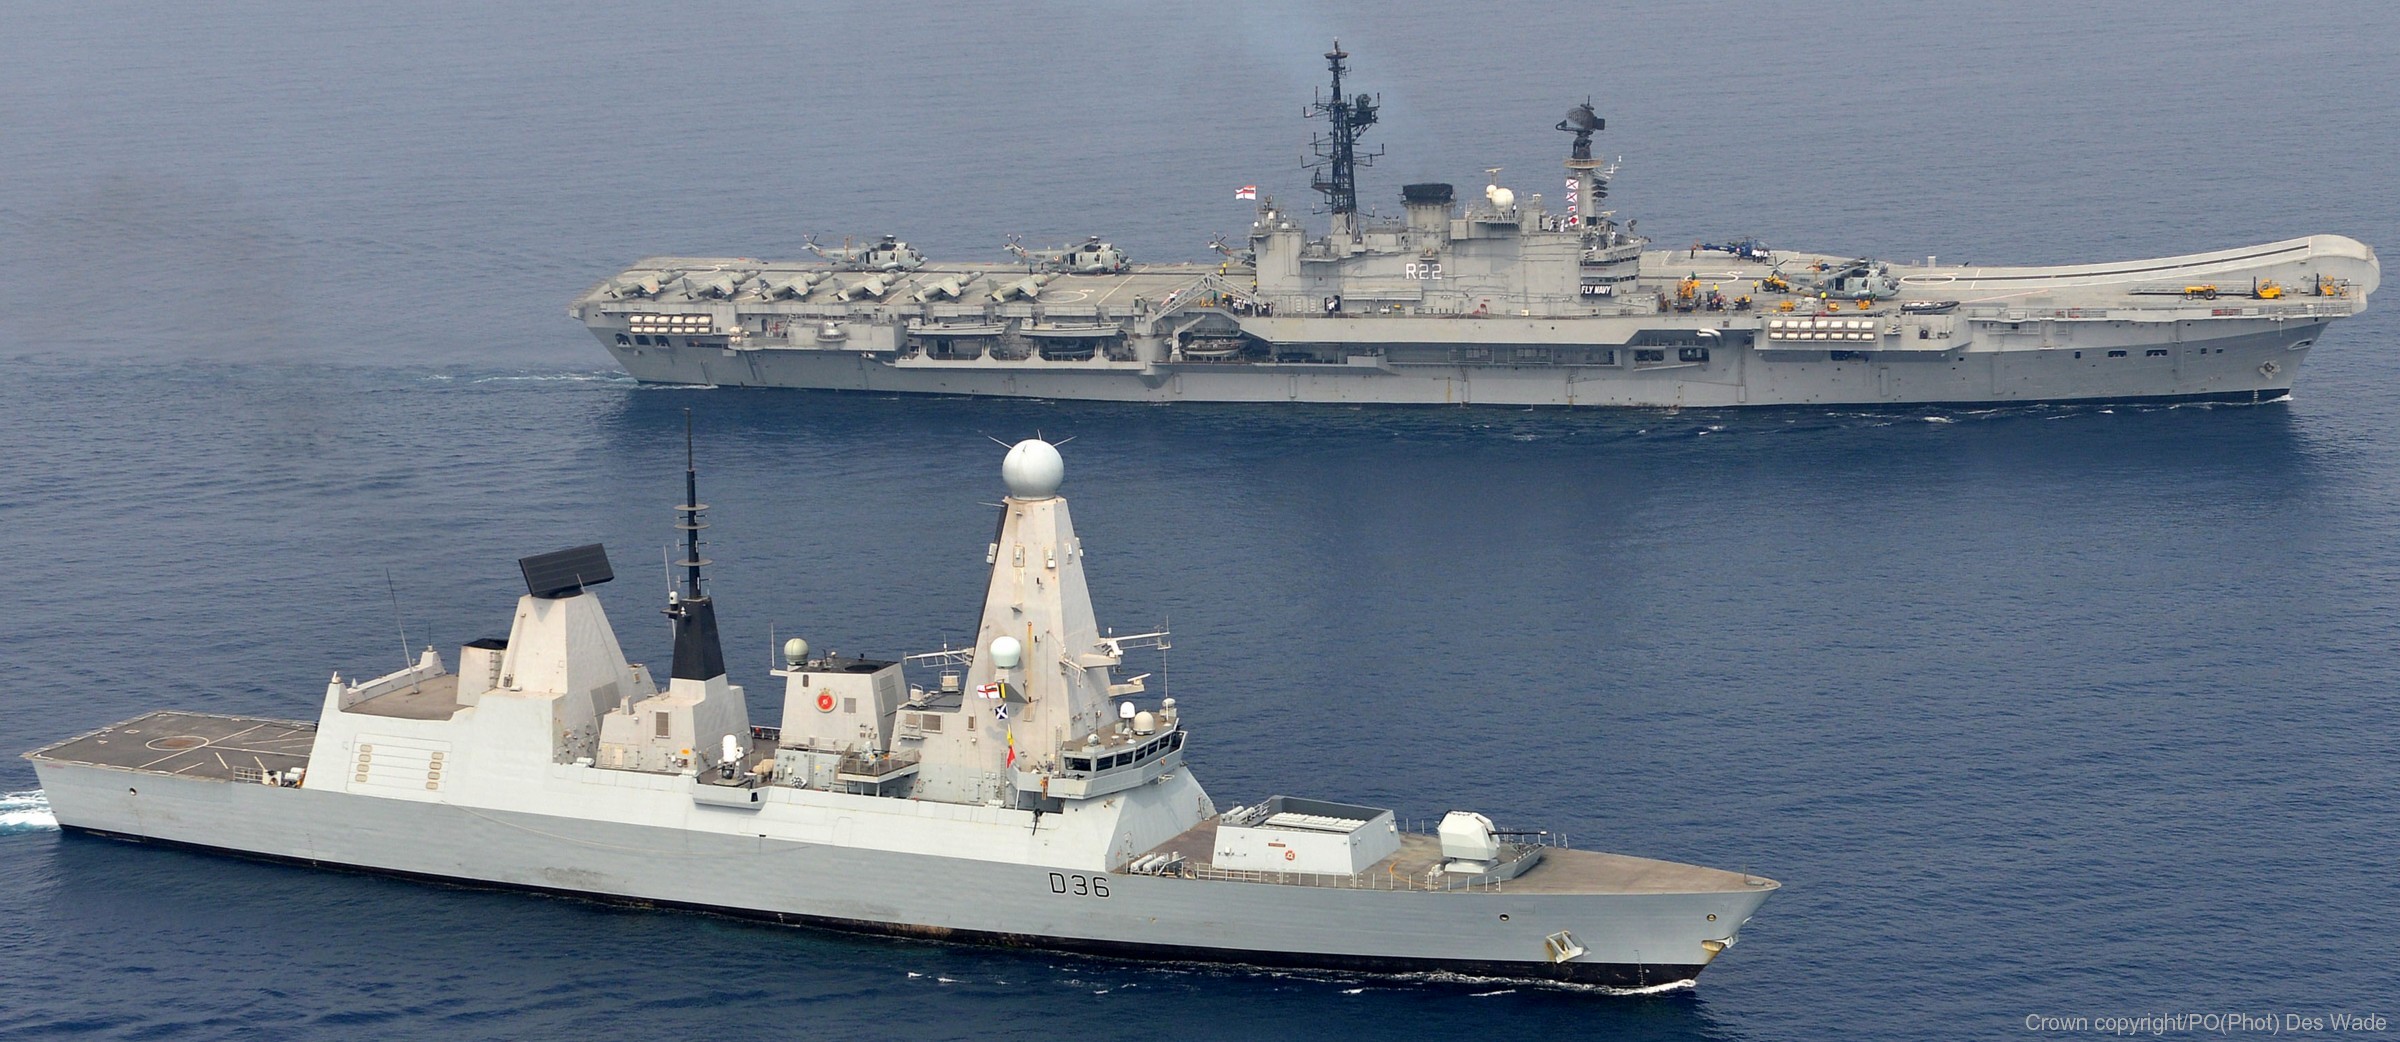 d36 hms defender d-36 type 45 daring class guided missile destroyer ddg royal navy sea viper 10